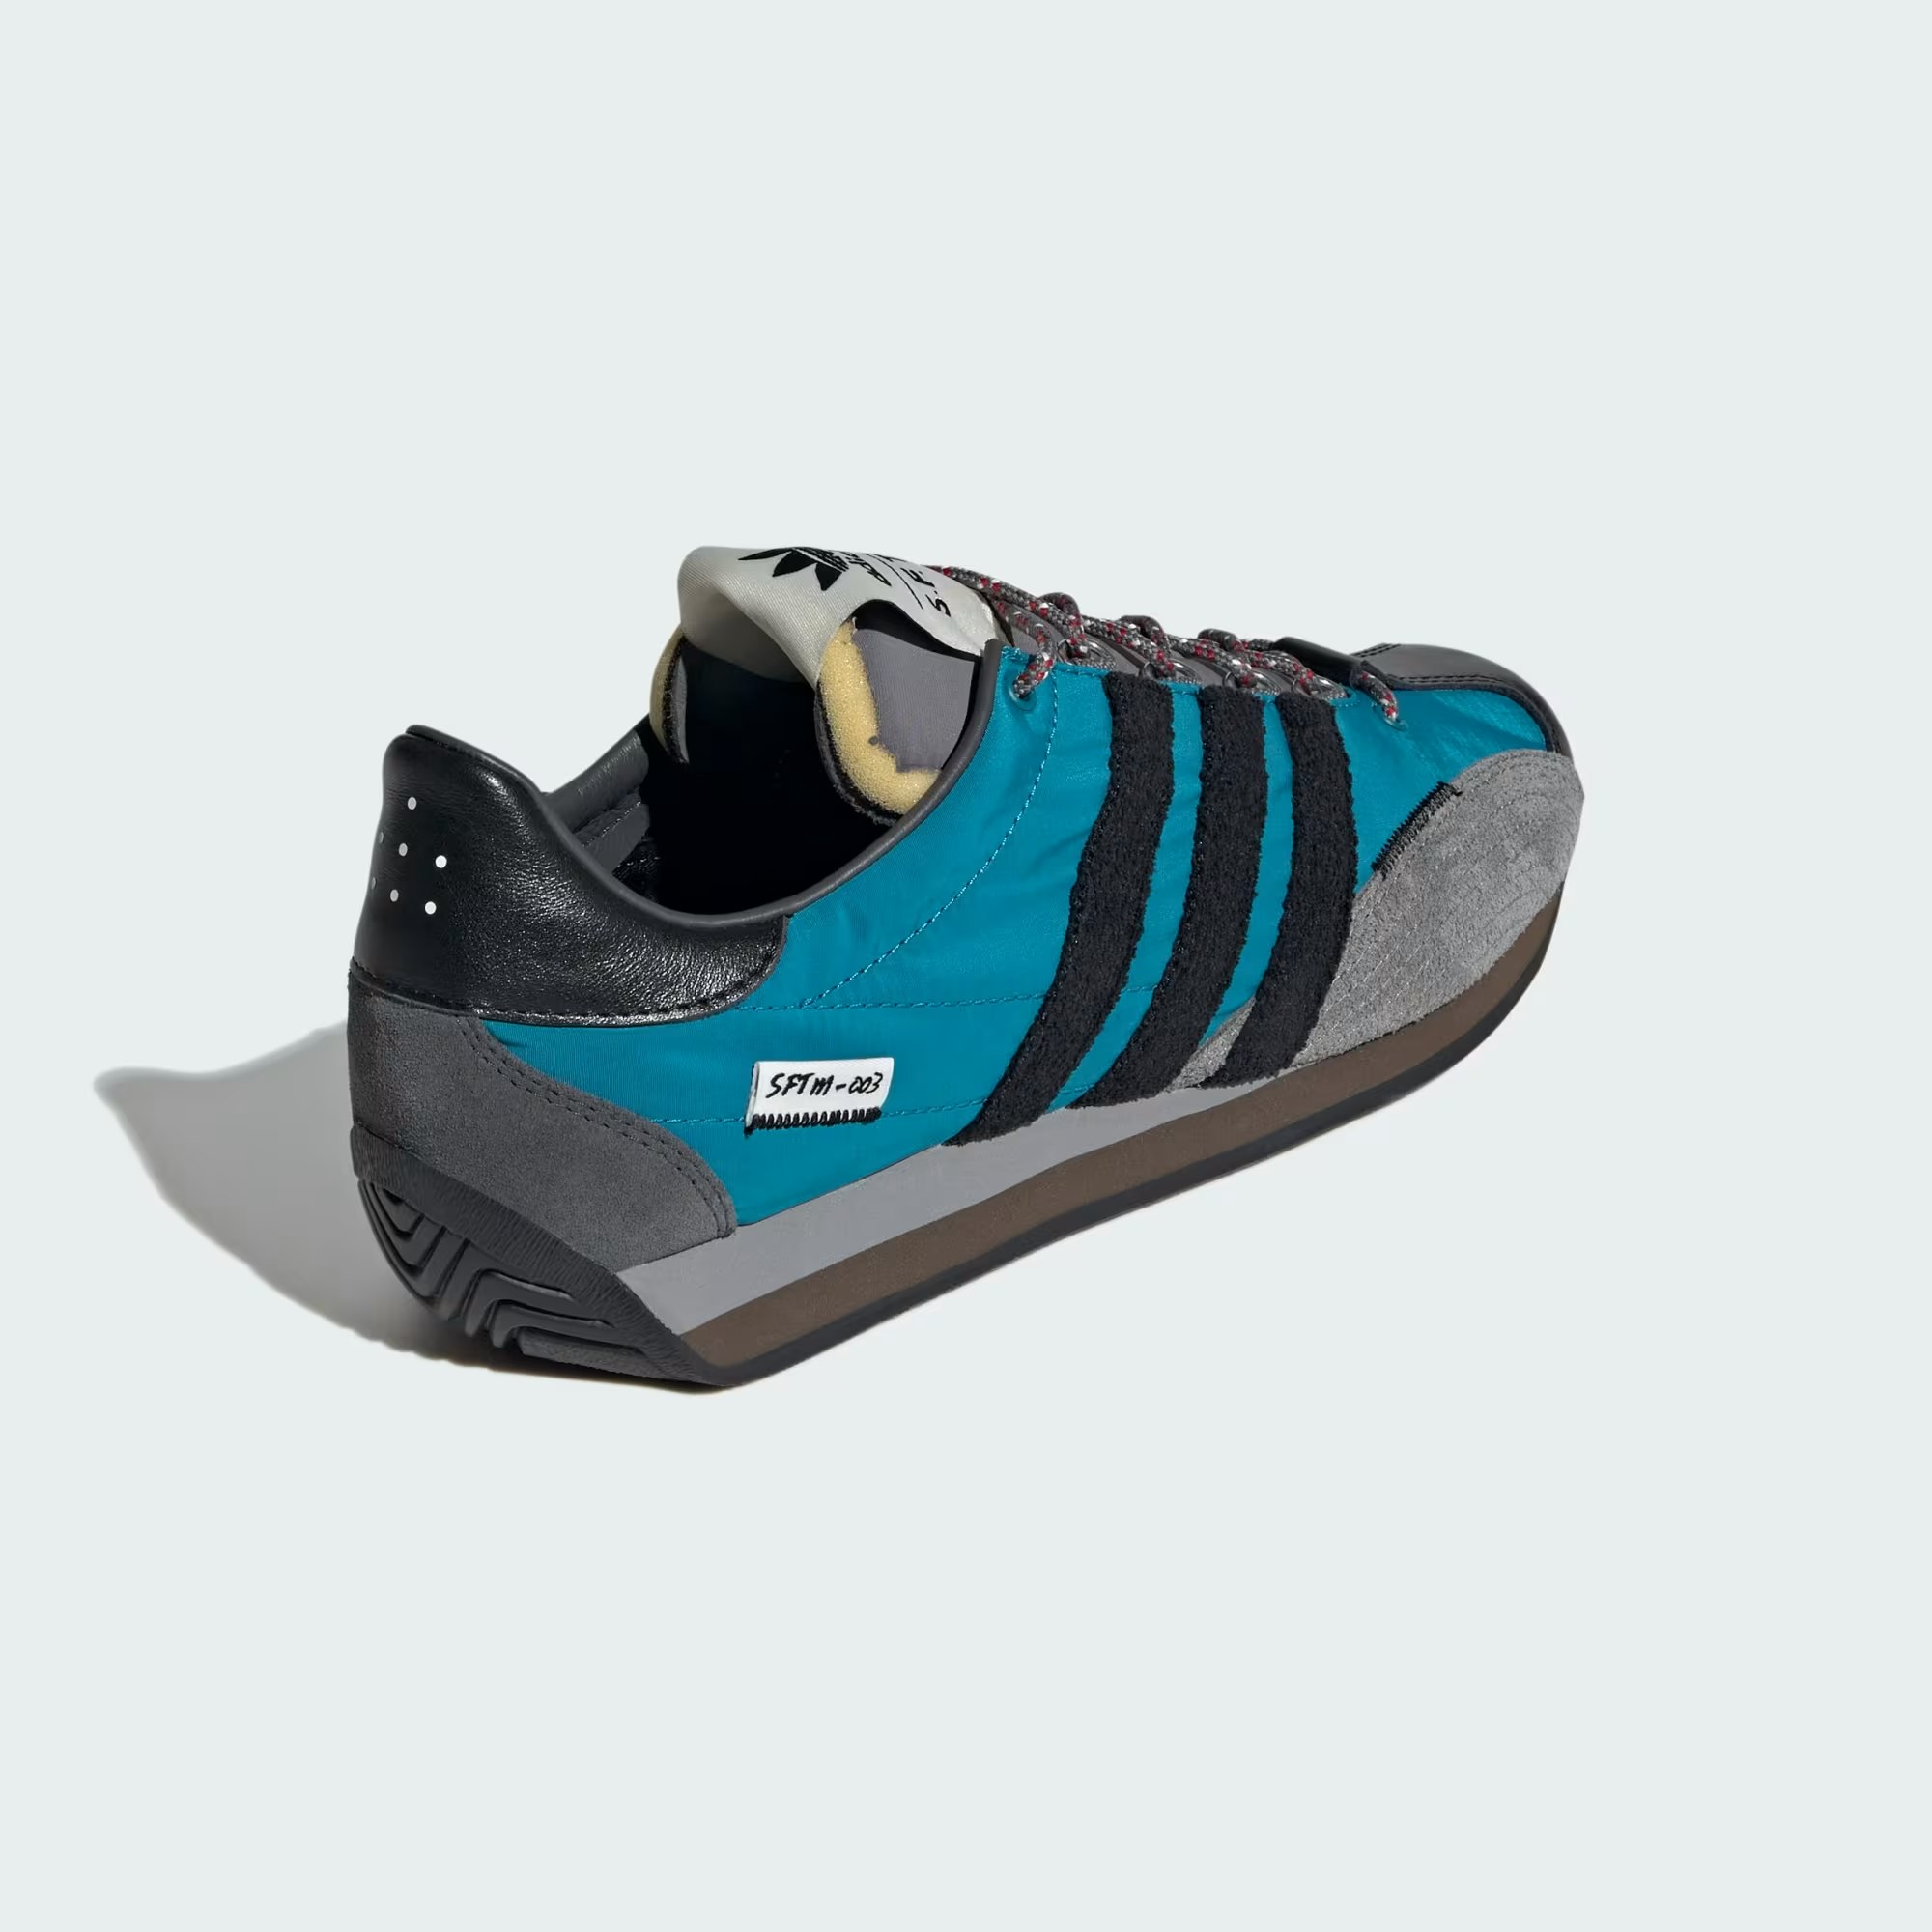 Song for the Mute x adidas Country OG "Active Teal"